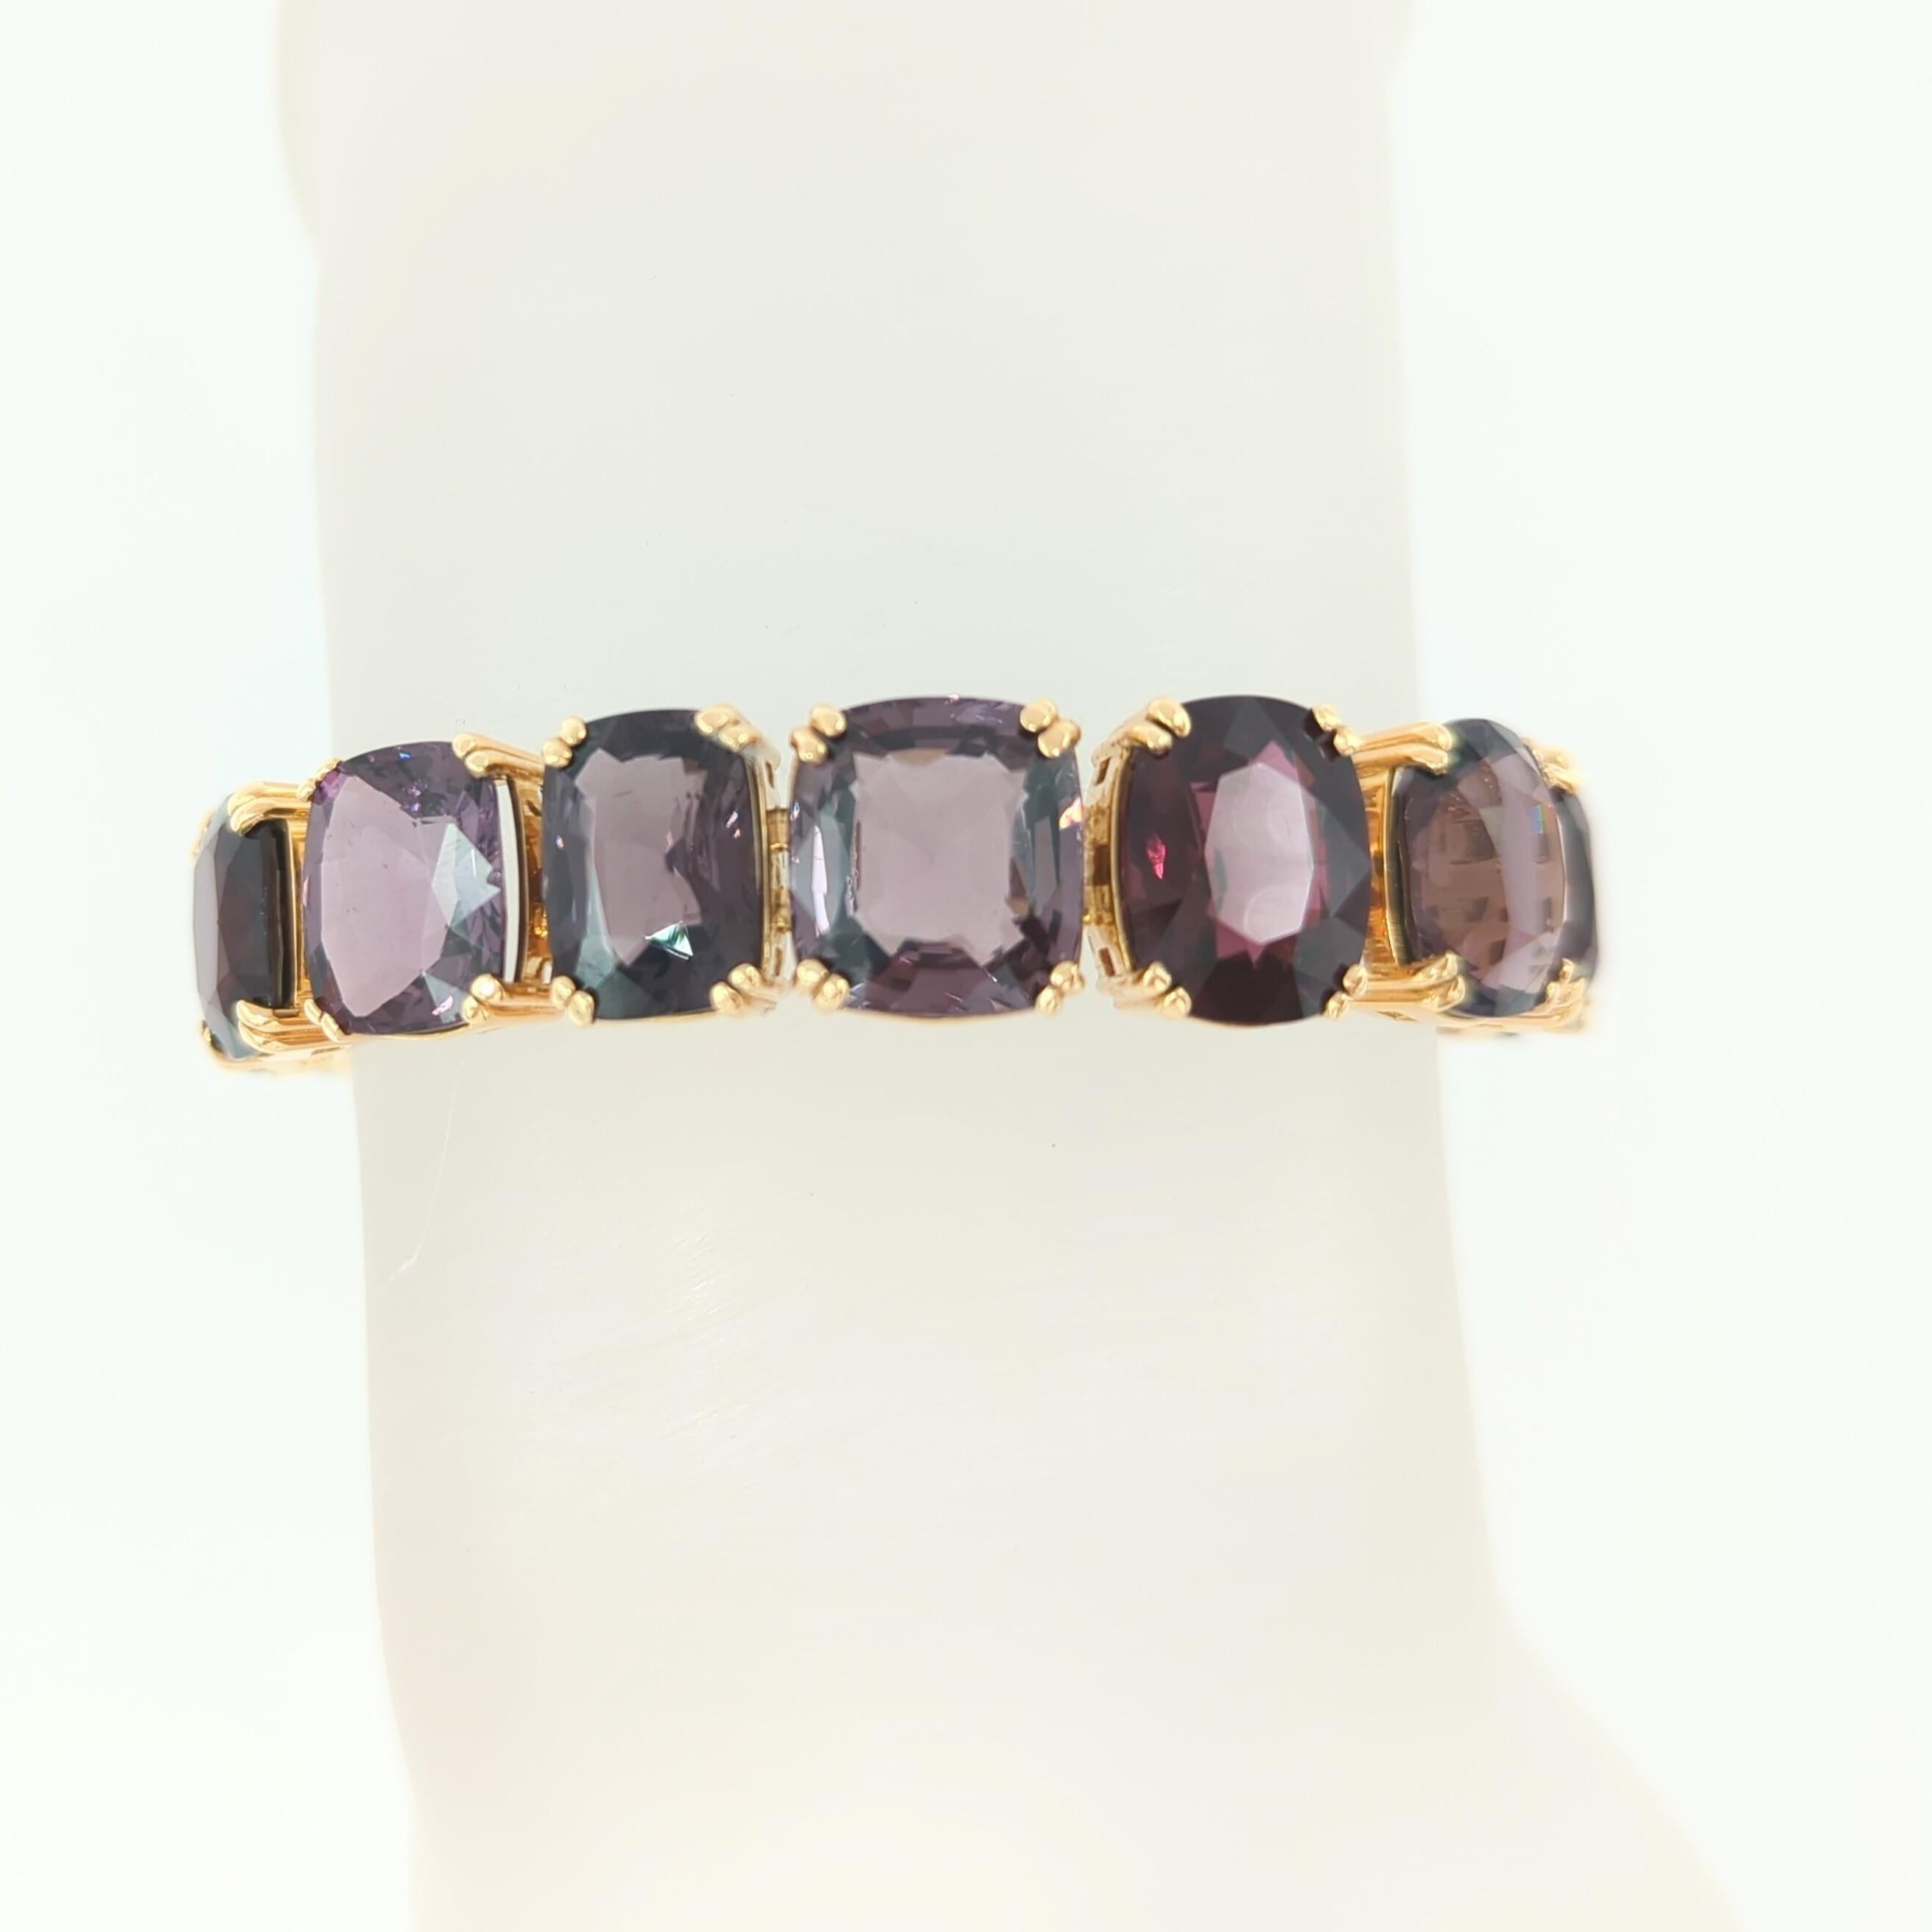 Gorgeous 90.24 ct. unheated Burmese multi color spinel cushions.  Total of 19 stones.  Length is 7+